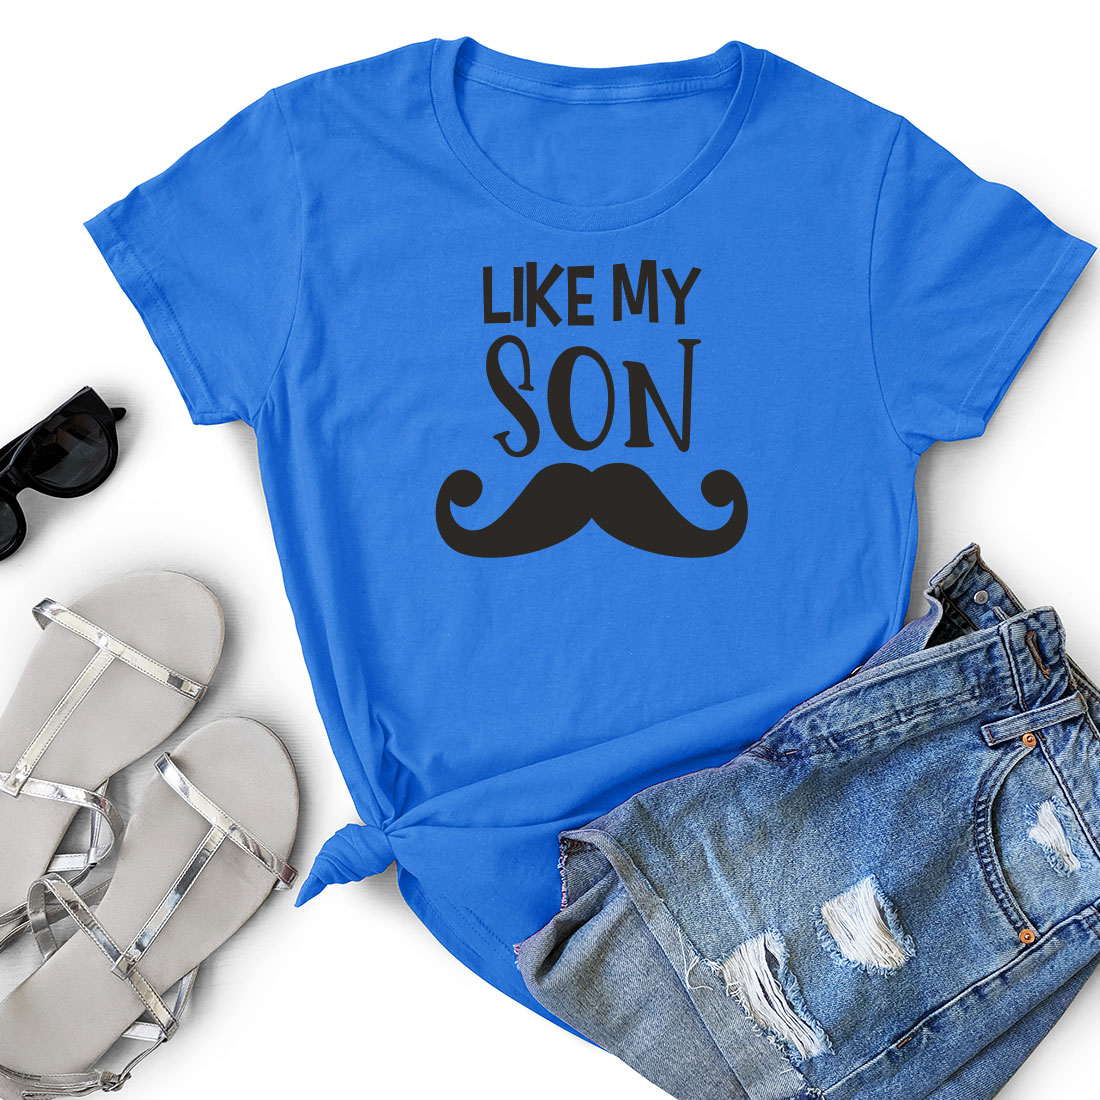 T - shirt that says like my son with a moustache on it.